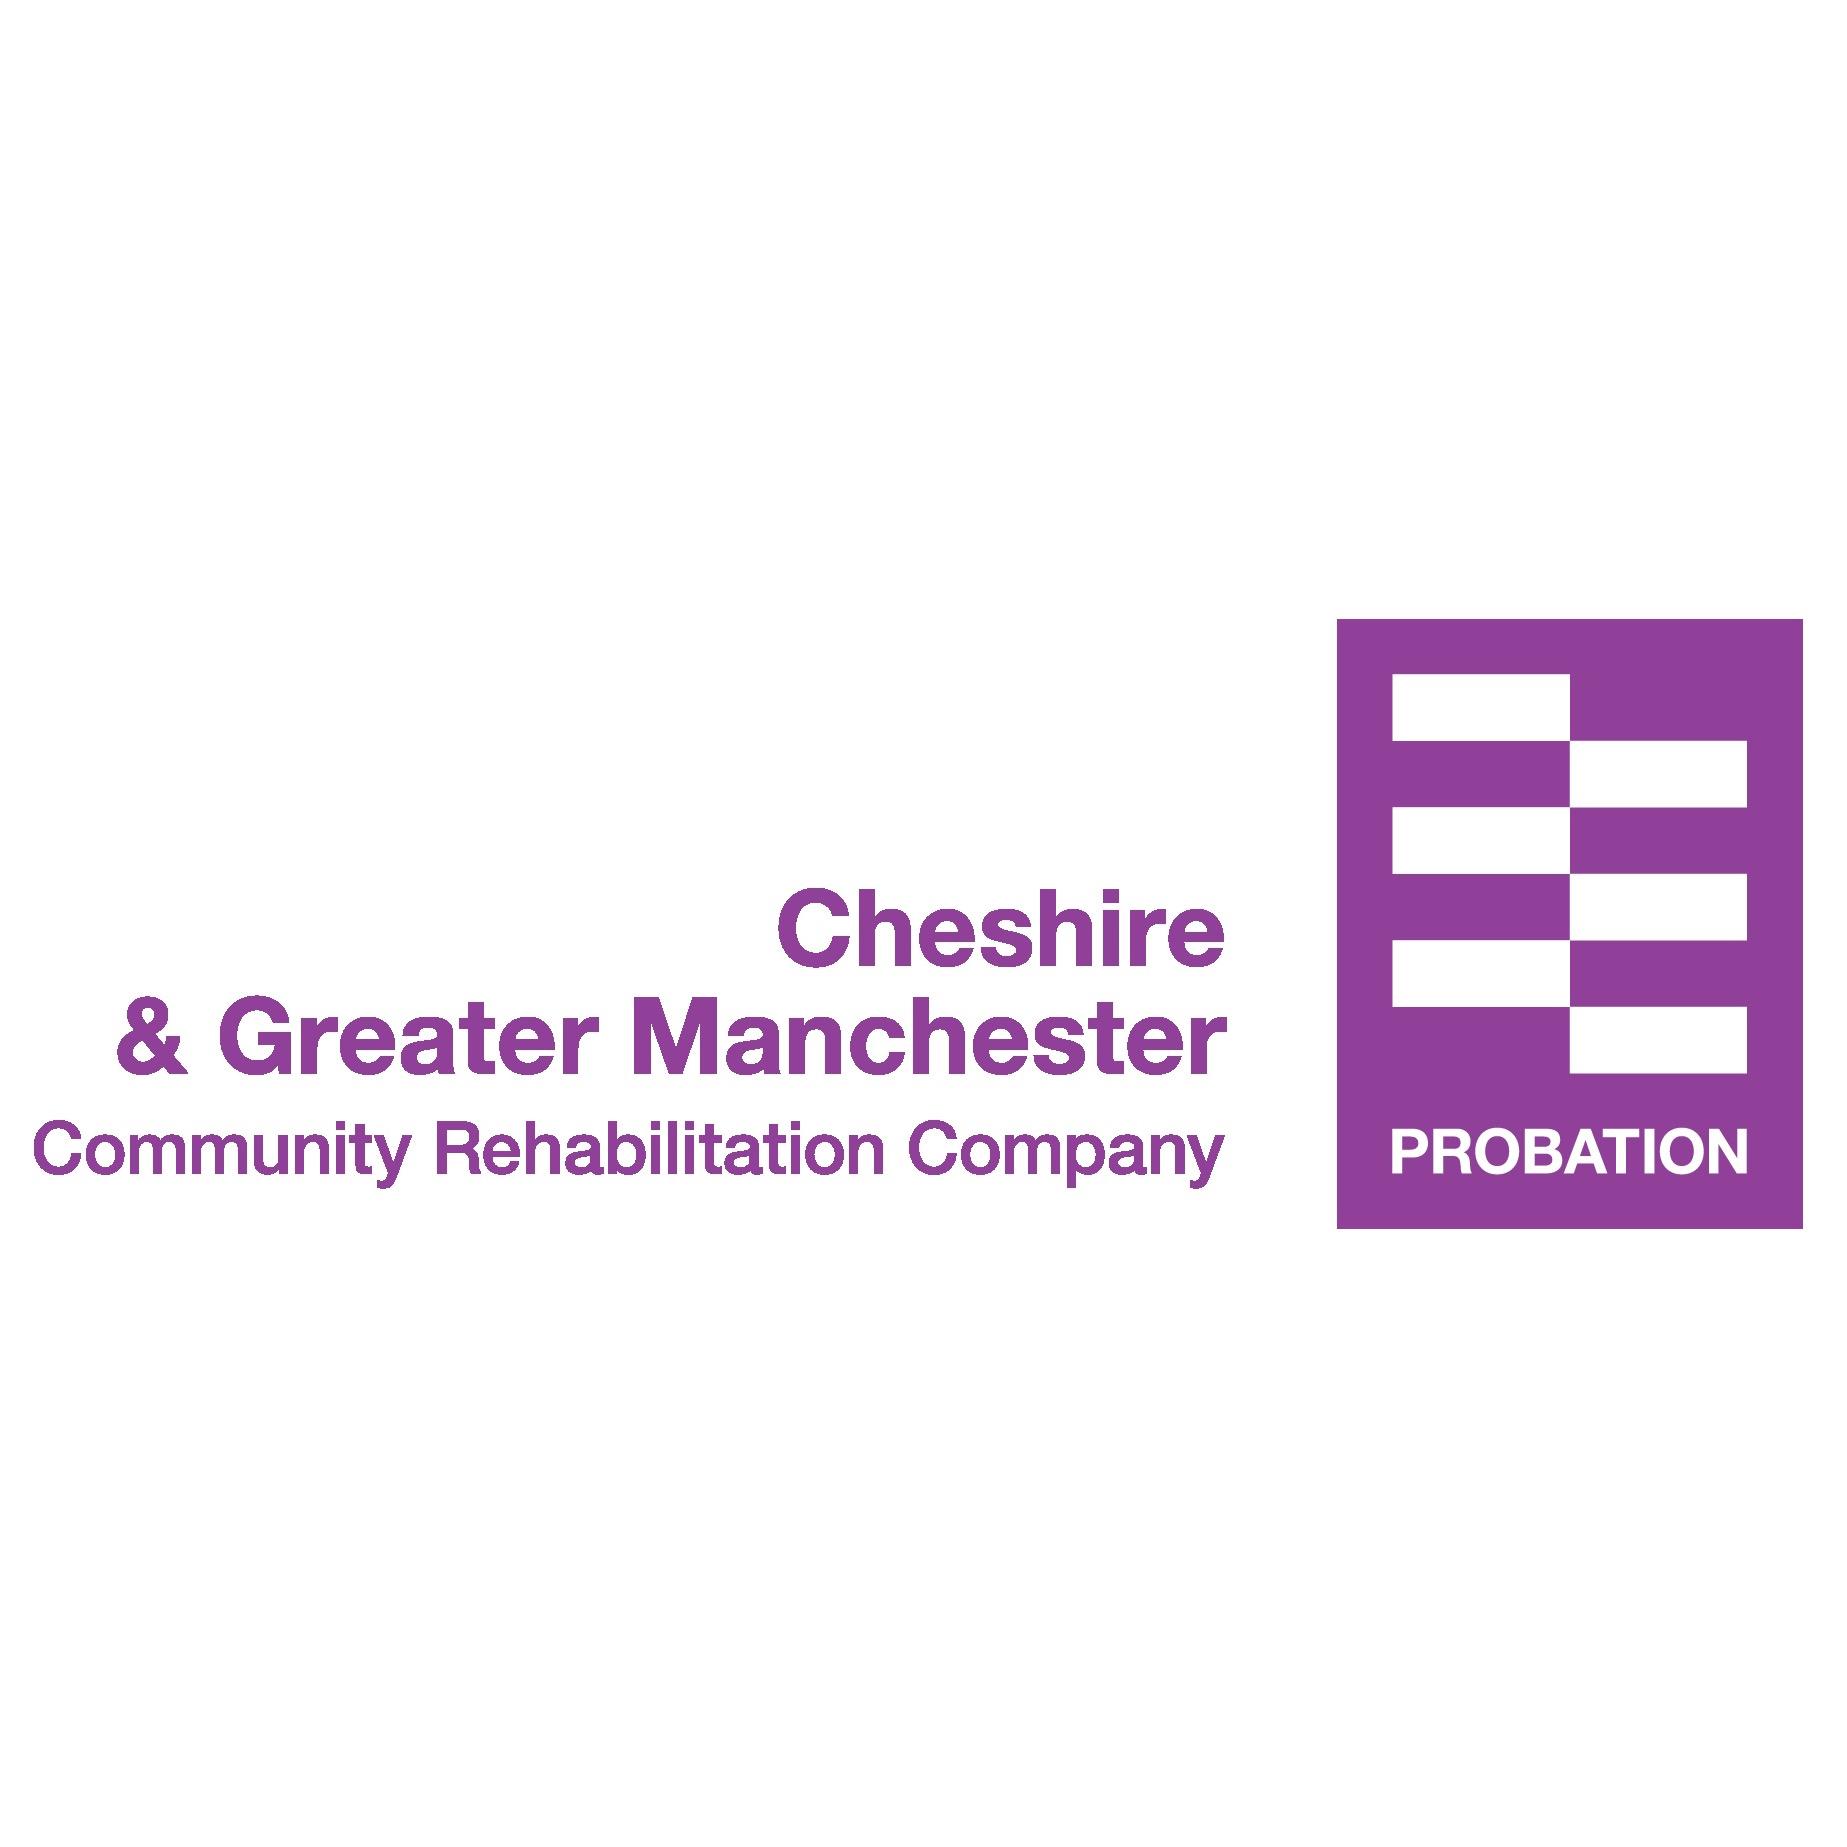 Official twitter feed for Cheshire & Greater Manchester Community Rehabilitation Company. We deliver world class probation services for offenders.